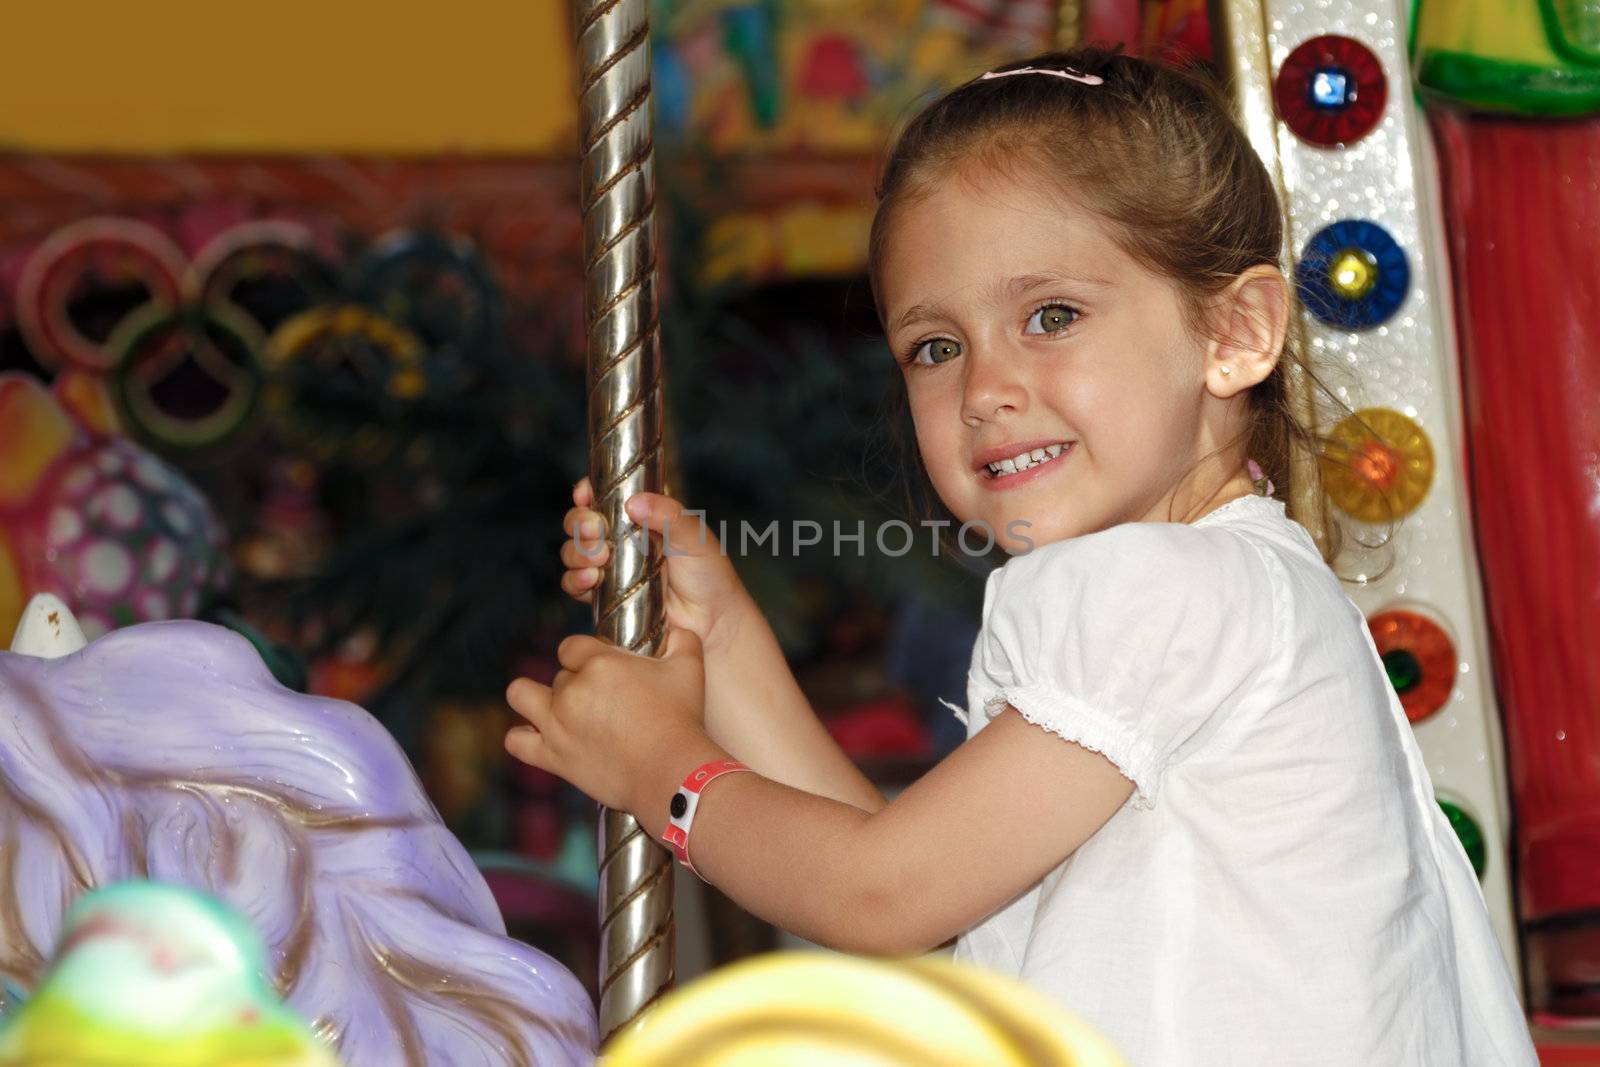 A sweet smiling child is sitting on horse in carousel